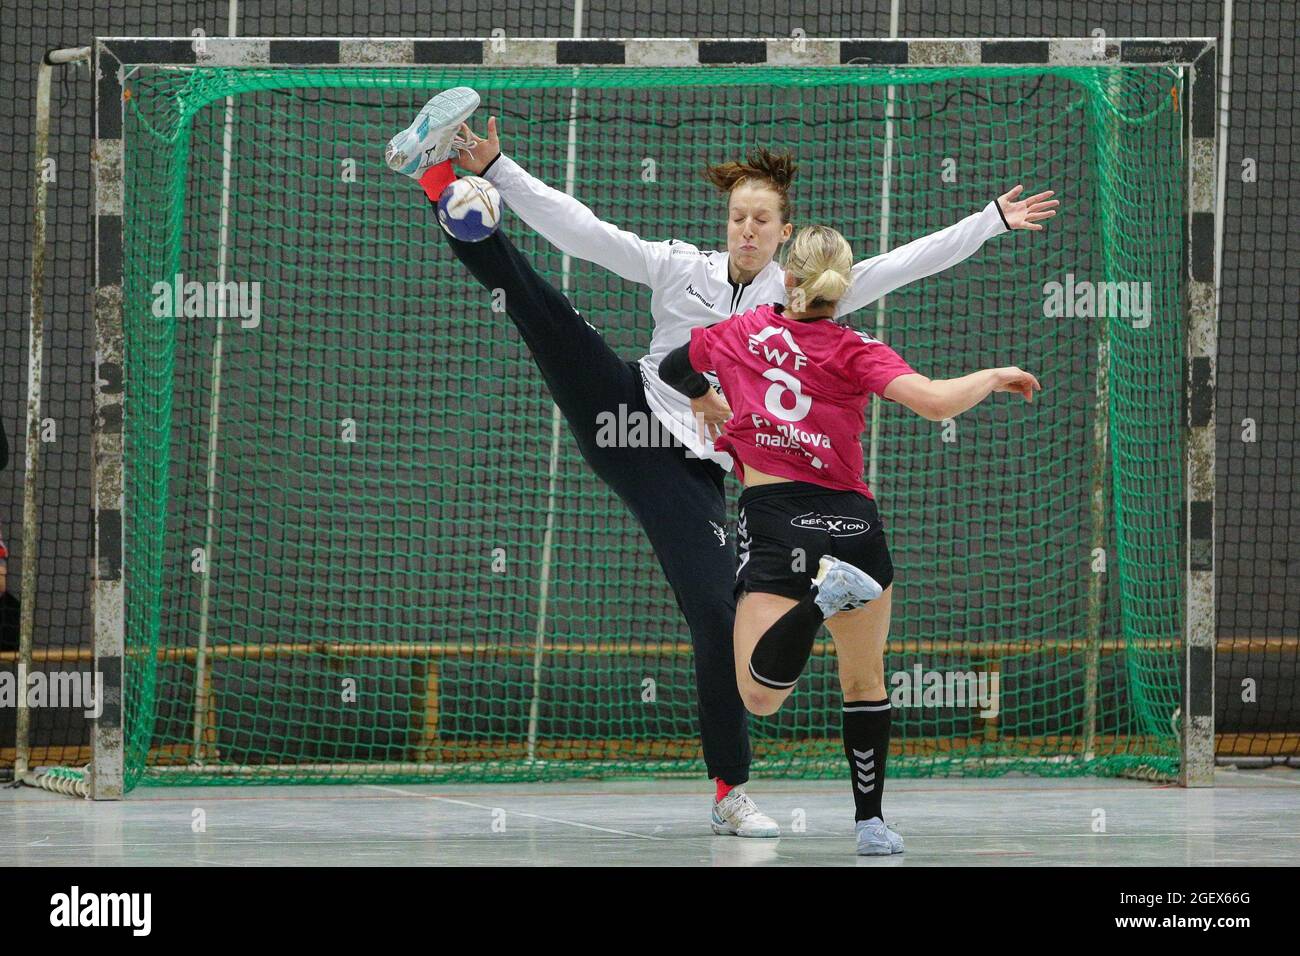 Extreme action goalkeeper parade. Handball goalkeeper with standing splits against the player in the jump shot. Stock Photo